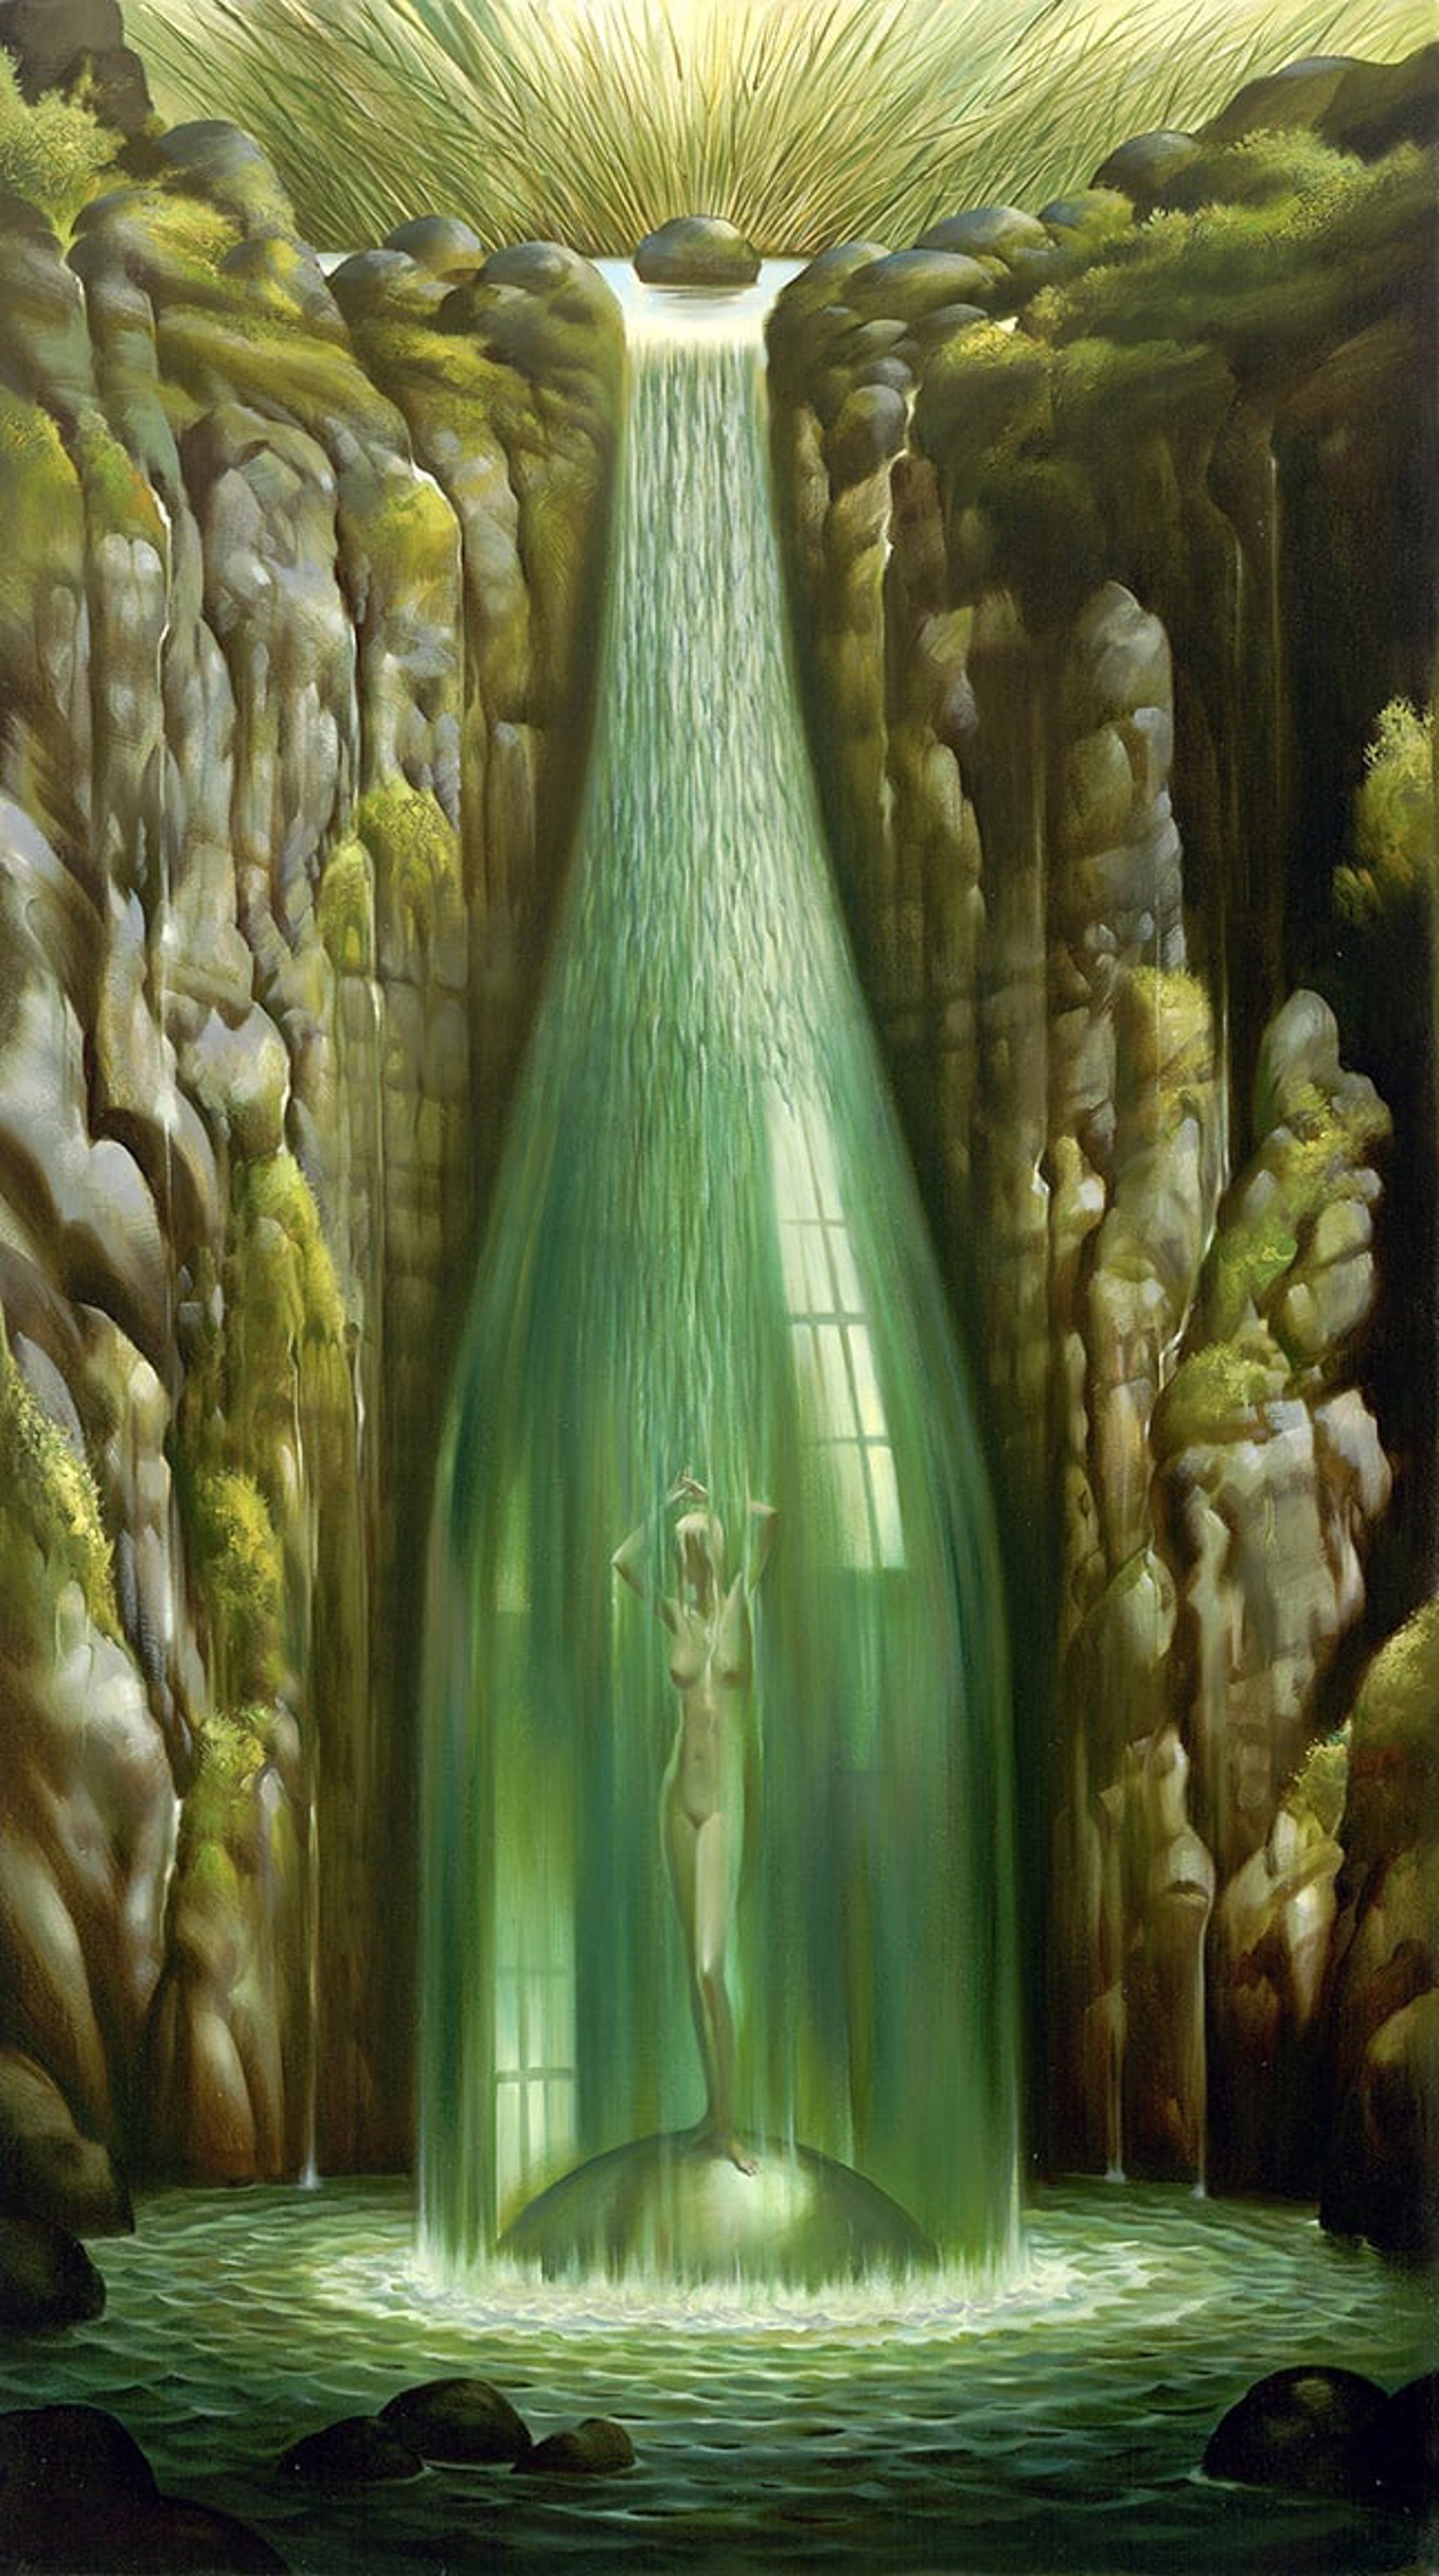 MYSTERY OF THE CONCEALED LETTER by Vladimir Kush